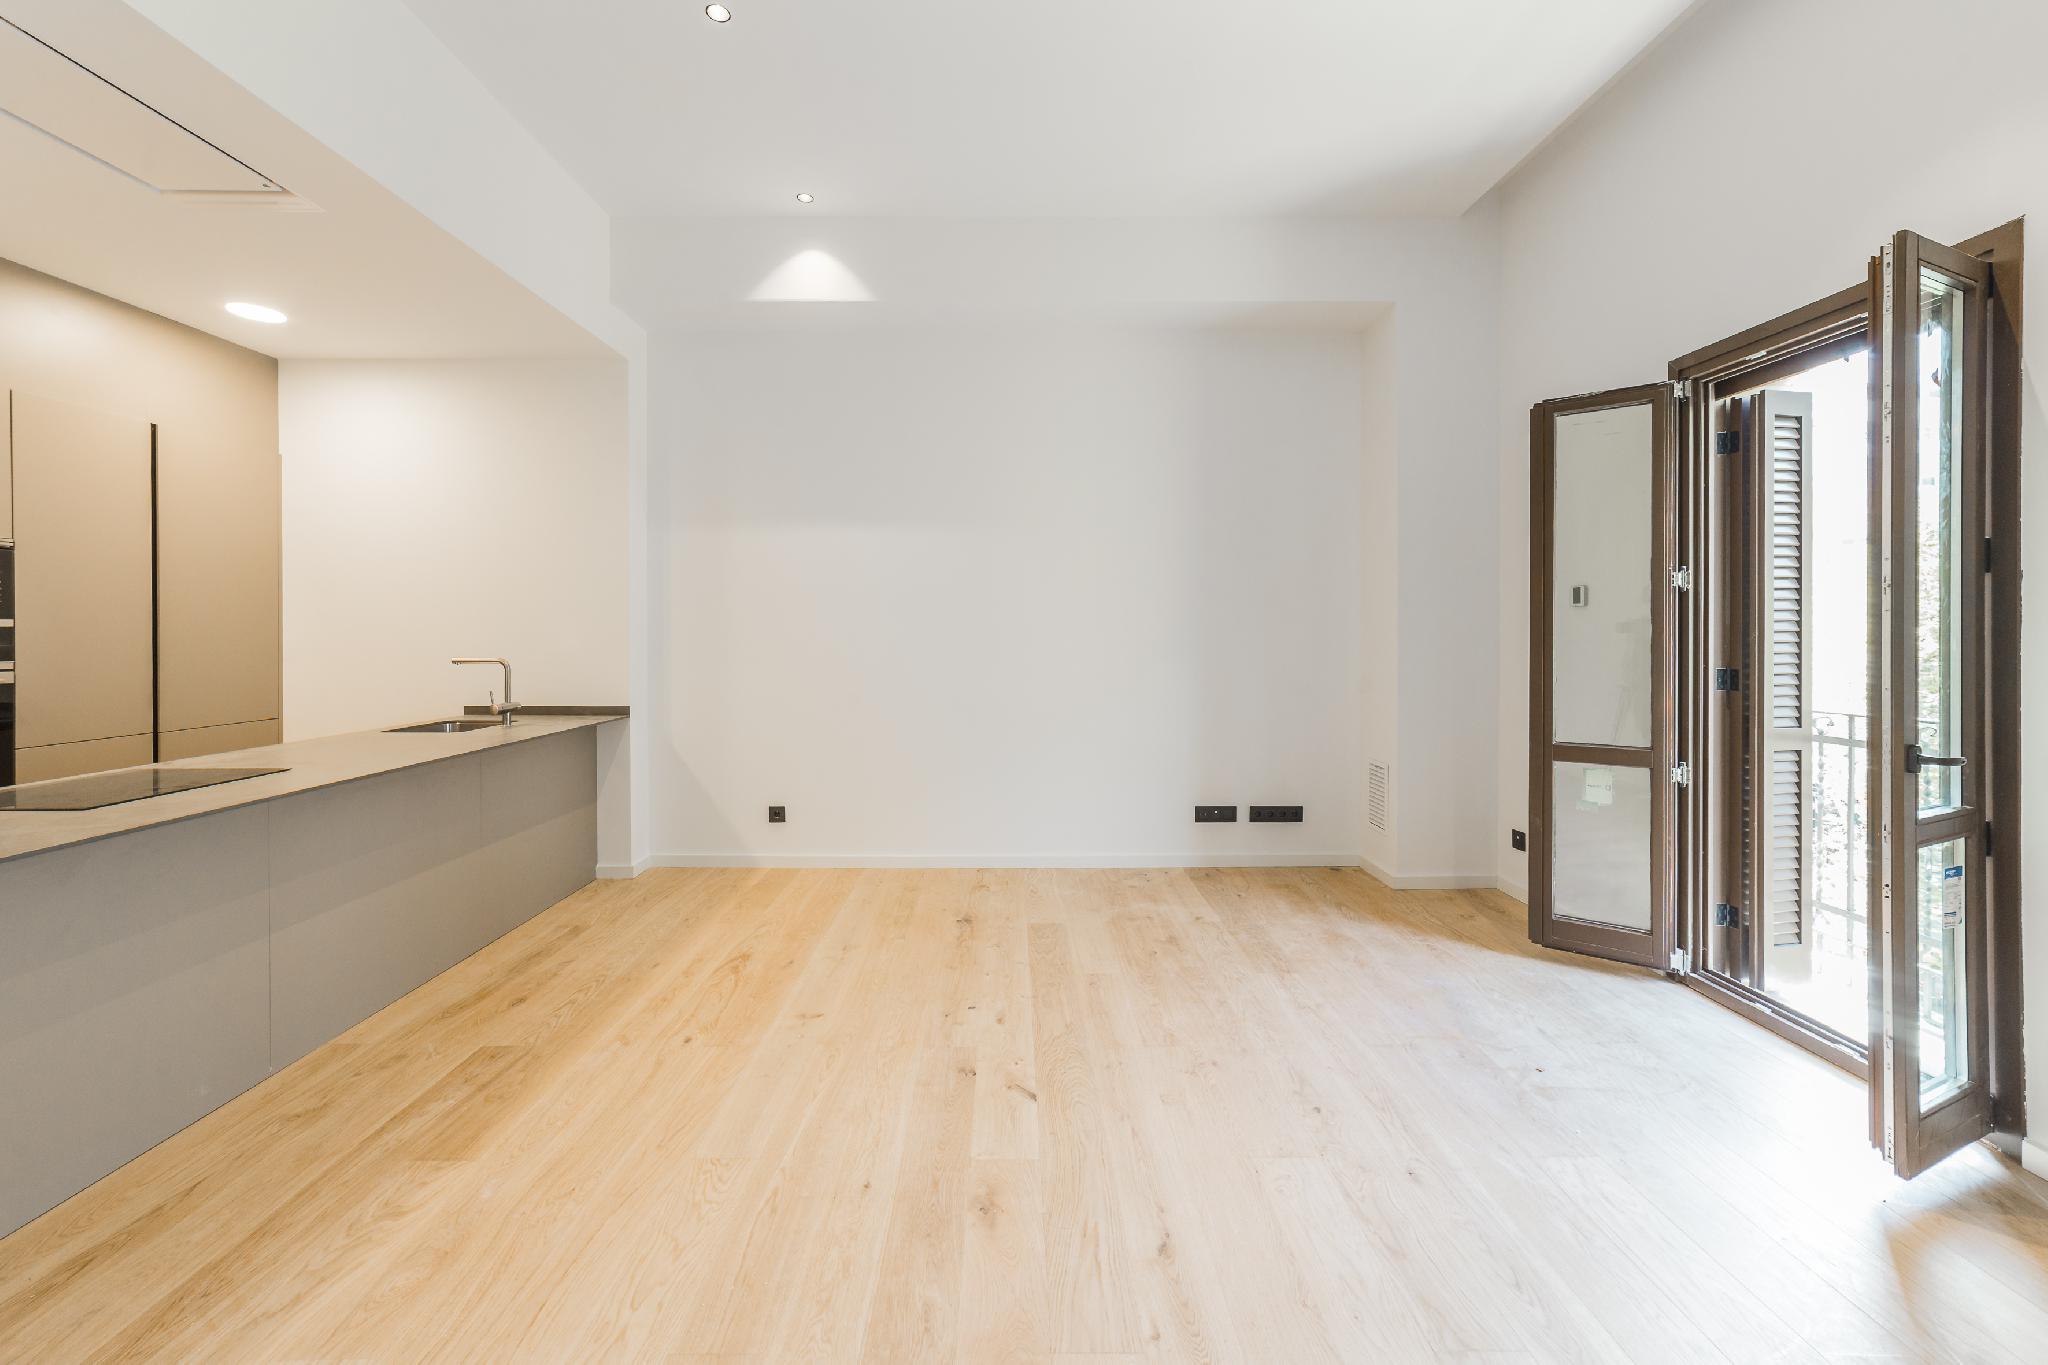 182456 Apartment for sale in Eixample, Old Left Eixample 28